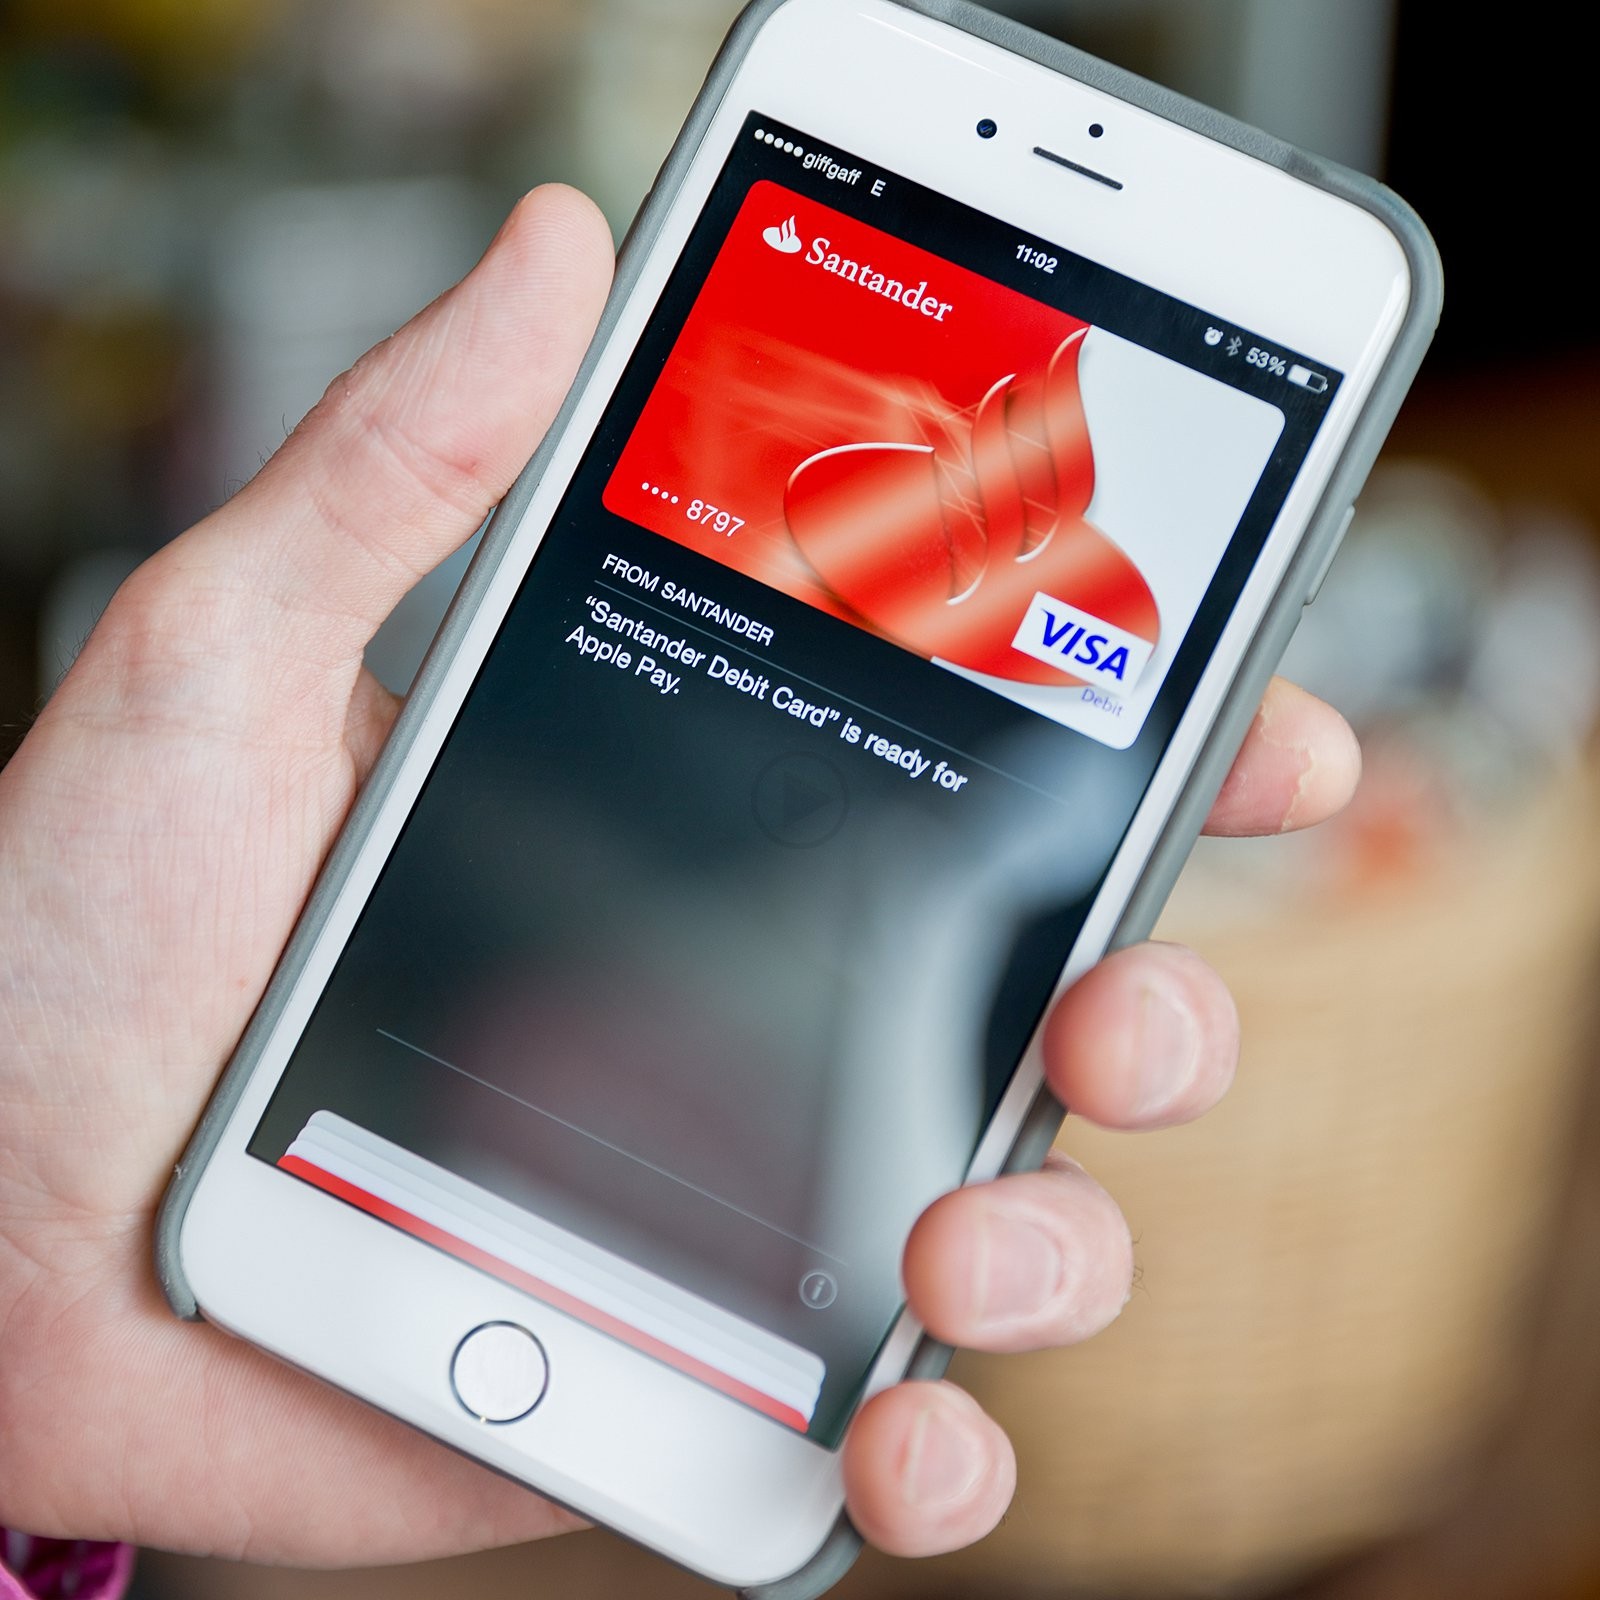 Promotions Offered on Transactions Made through Apple Pay